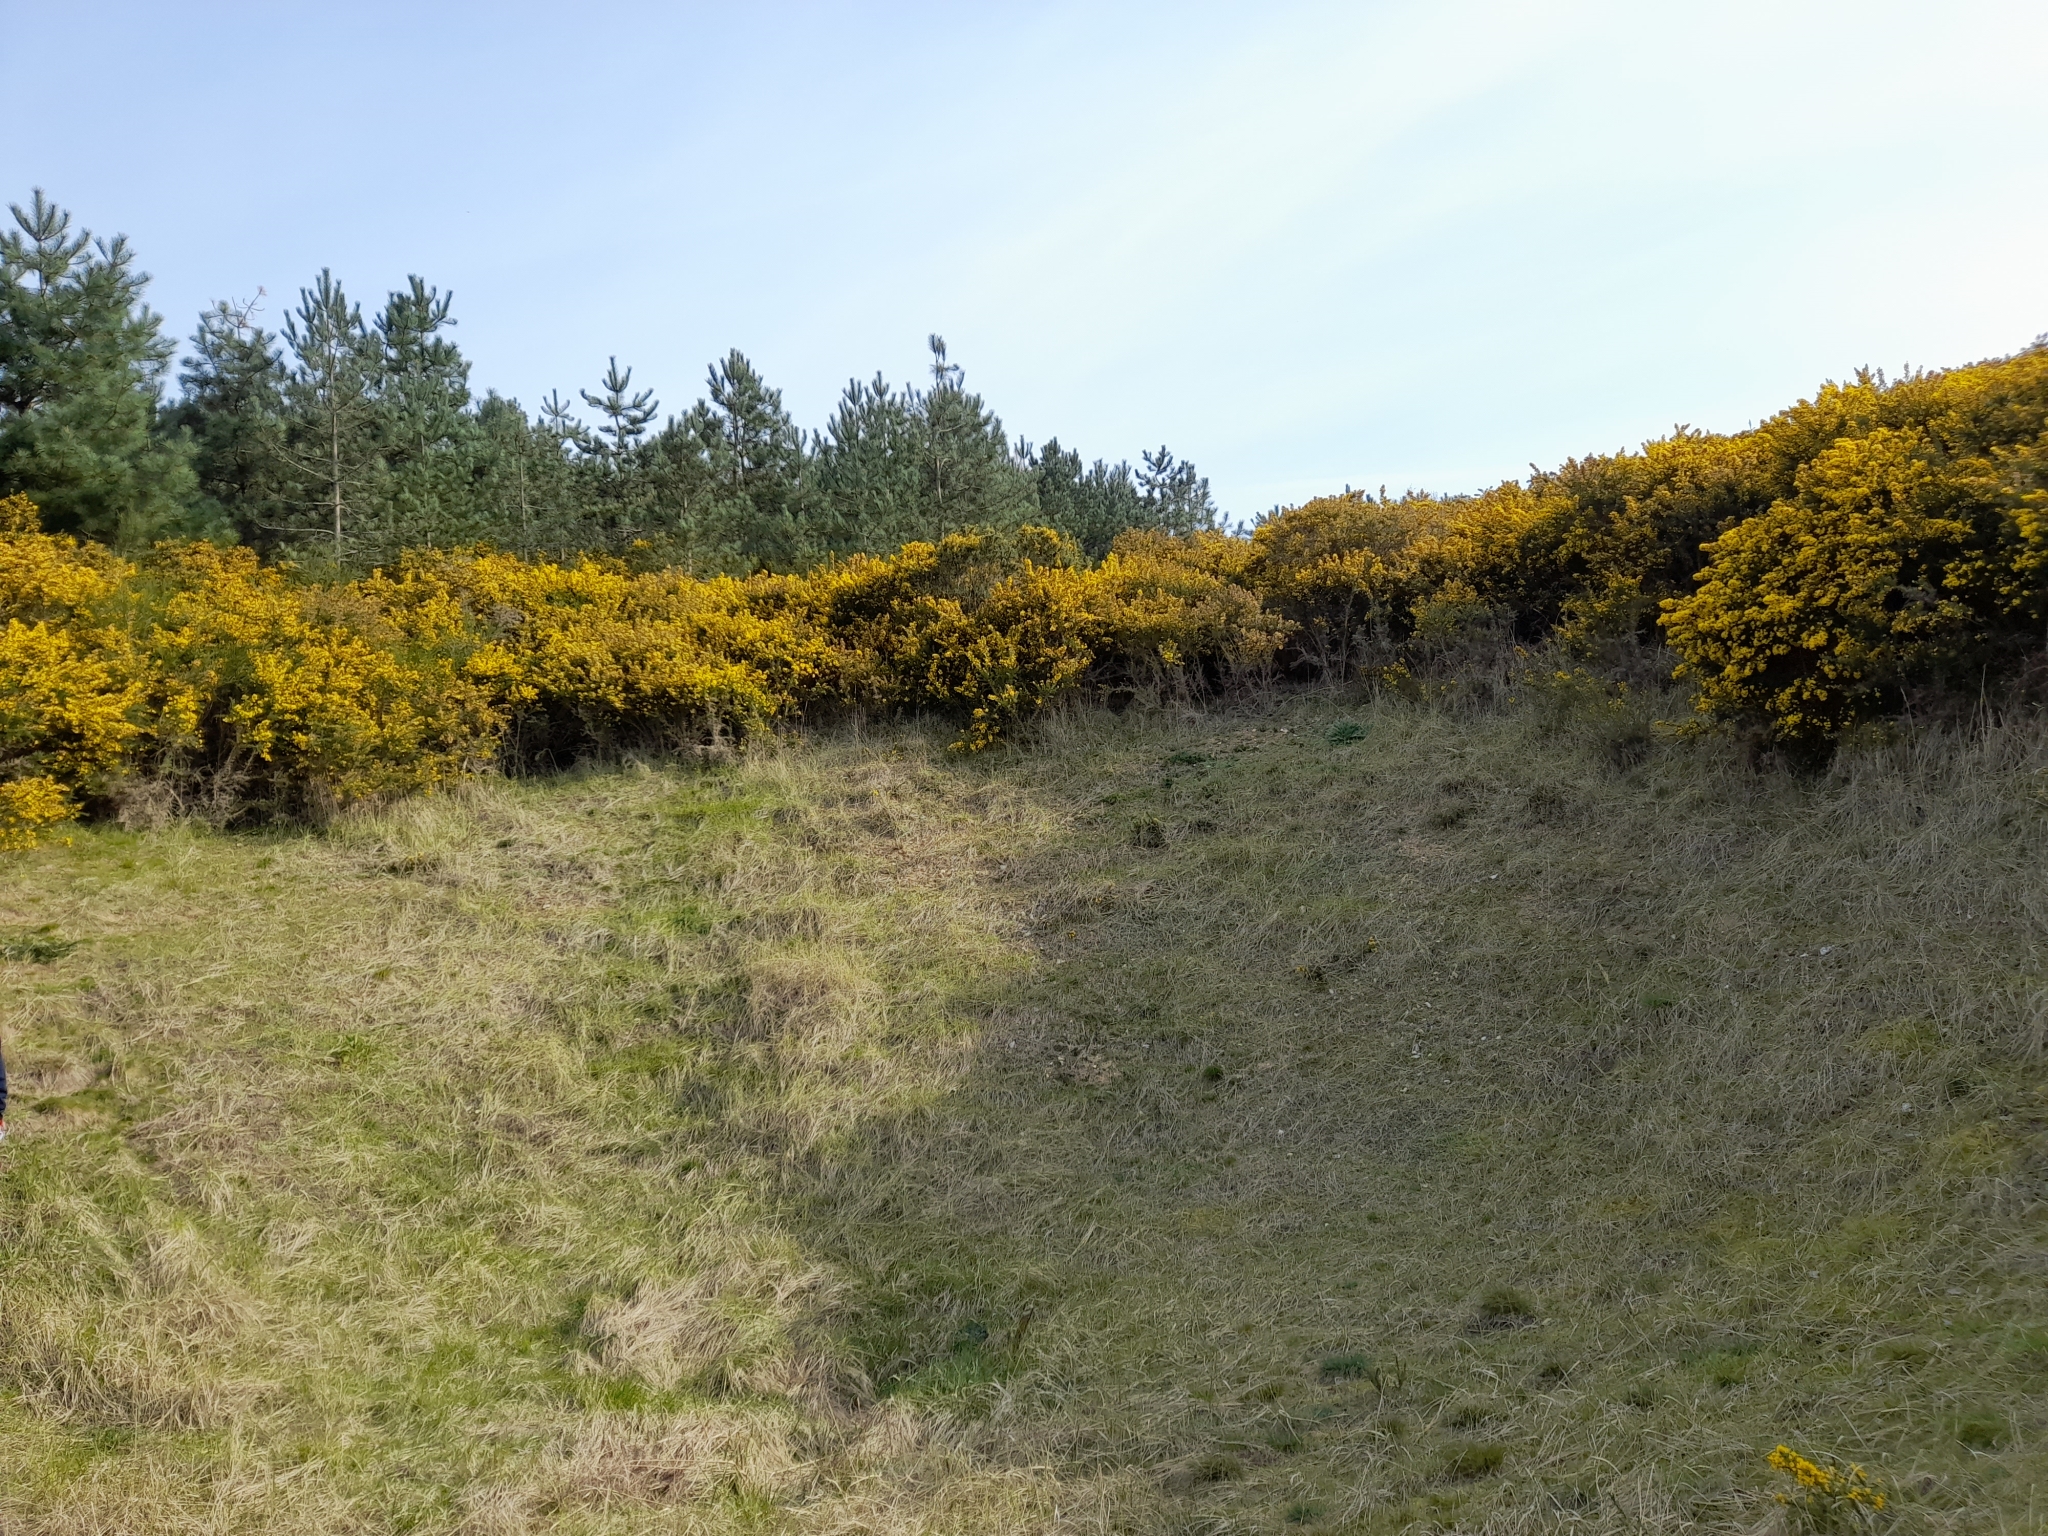 A photo from the FoTF Conservation Event - April 2022 - Scrub Clearance at Mildenhall Mugwort Pits : A view across the pit showing the Gorse at the top of the pit